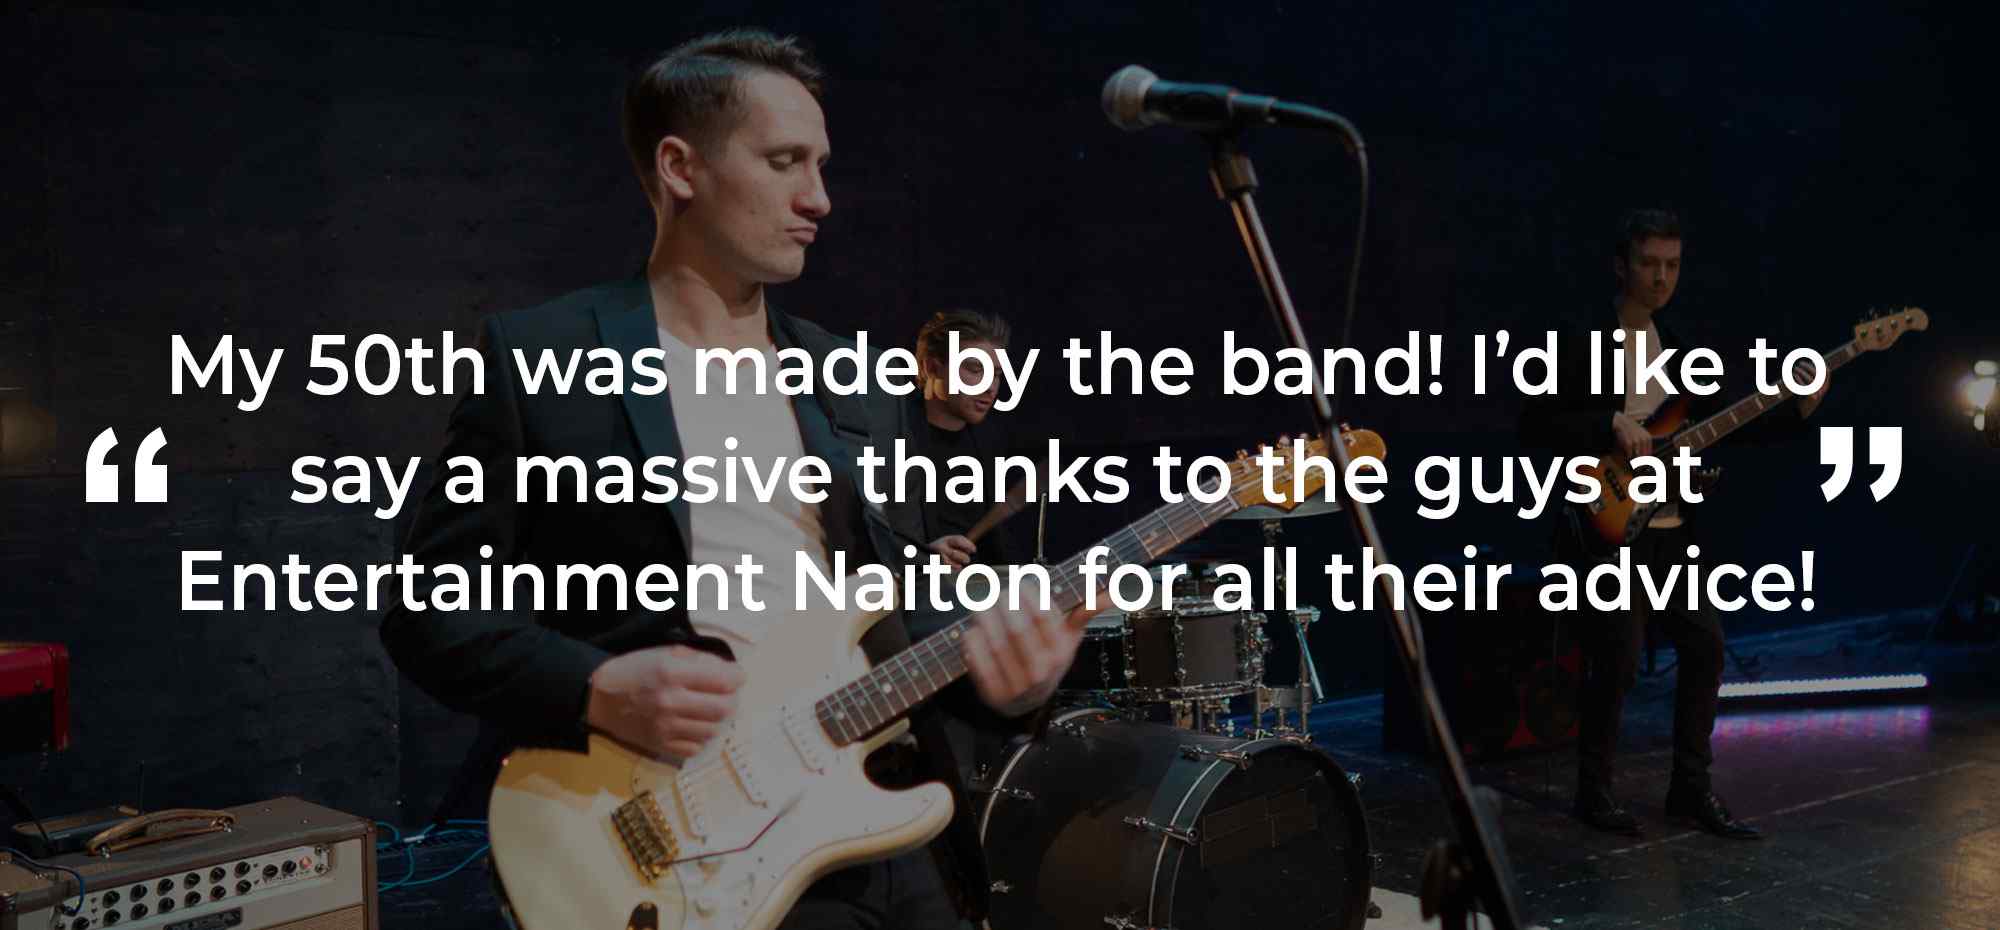 Client Review of a Party Band Cornwall